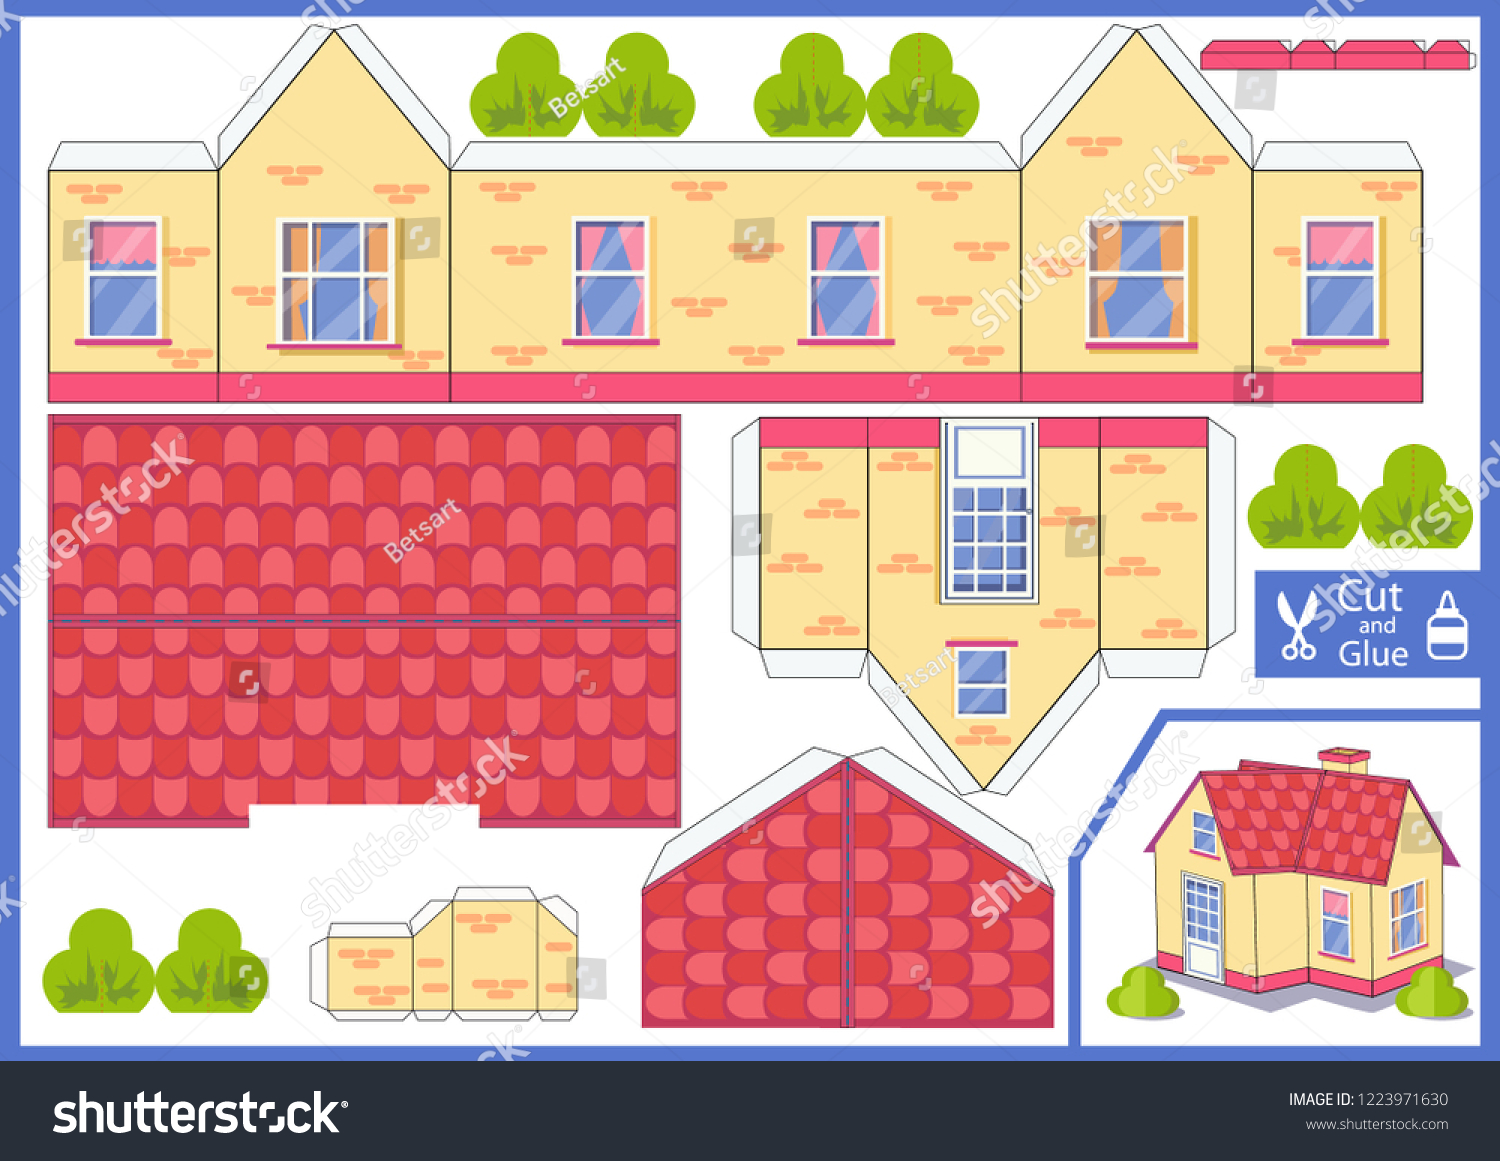 Printable Paper House Template from image.shutterstock.com